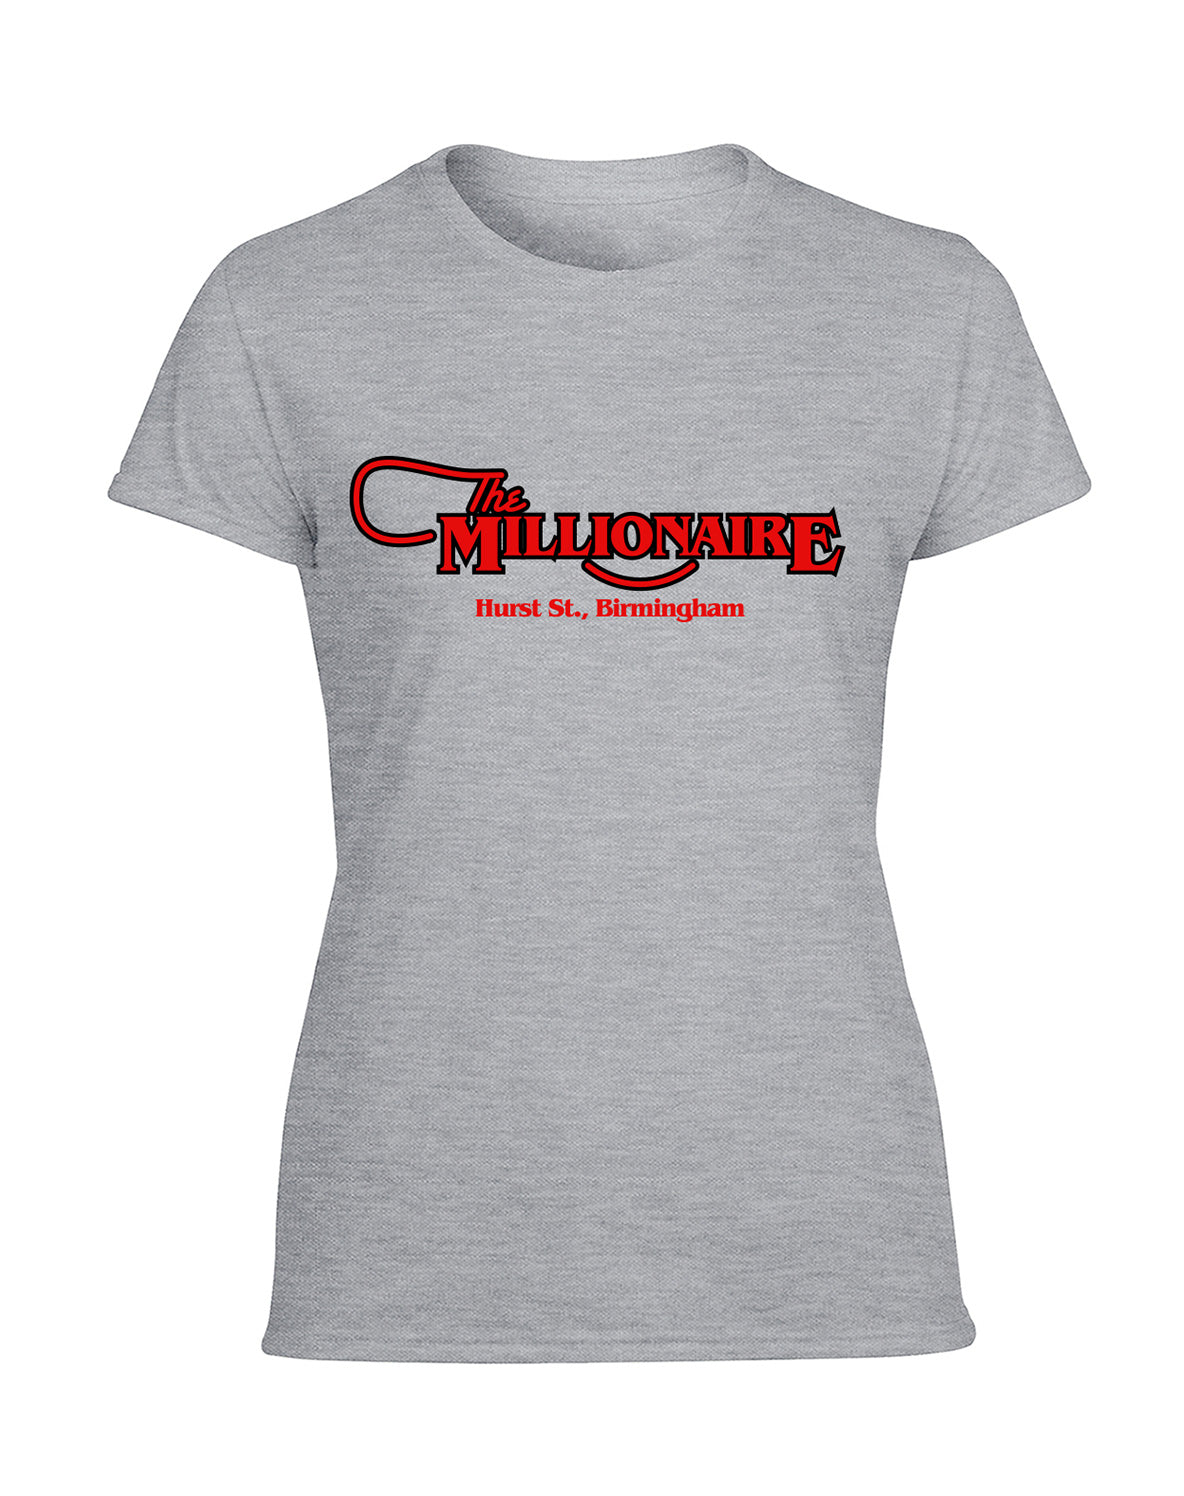 The Millionaire ladies fit T-shirt - various colours - Dirty Stop Outs